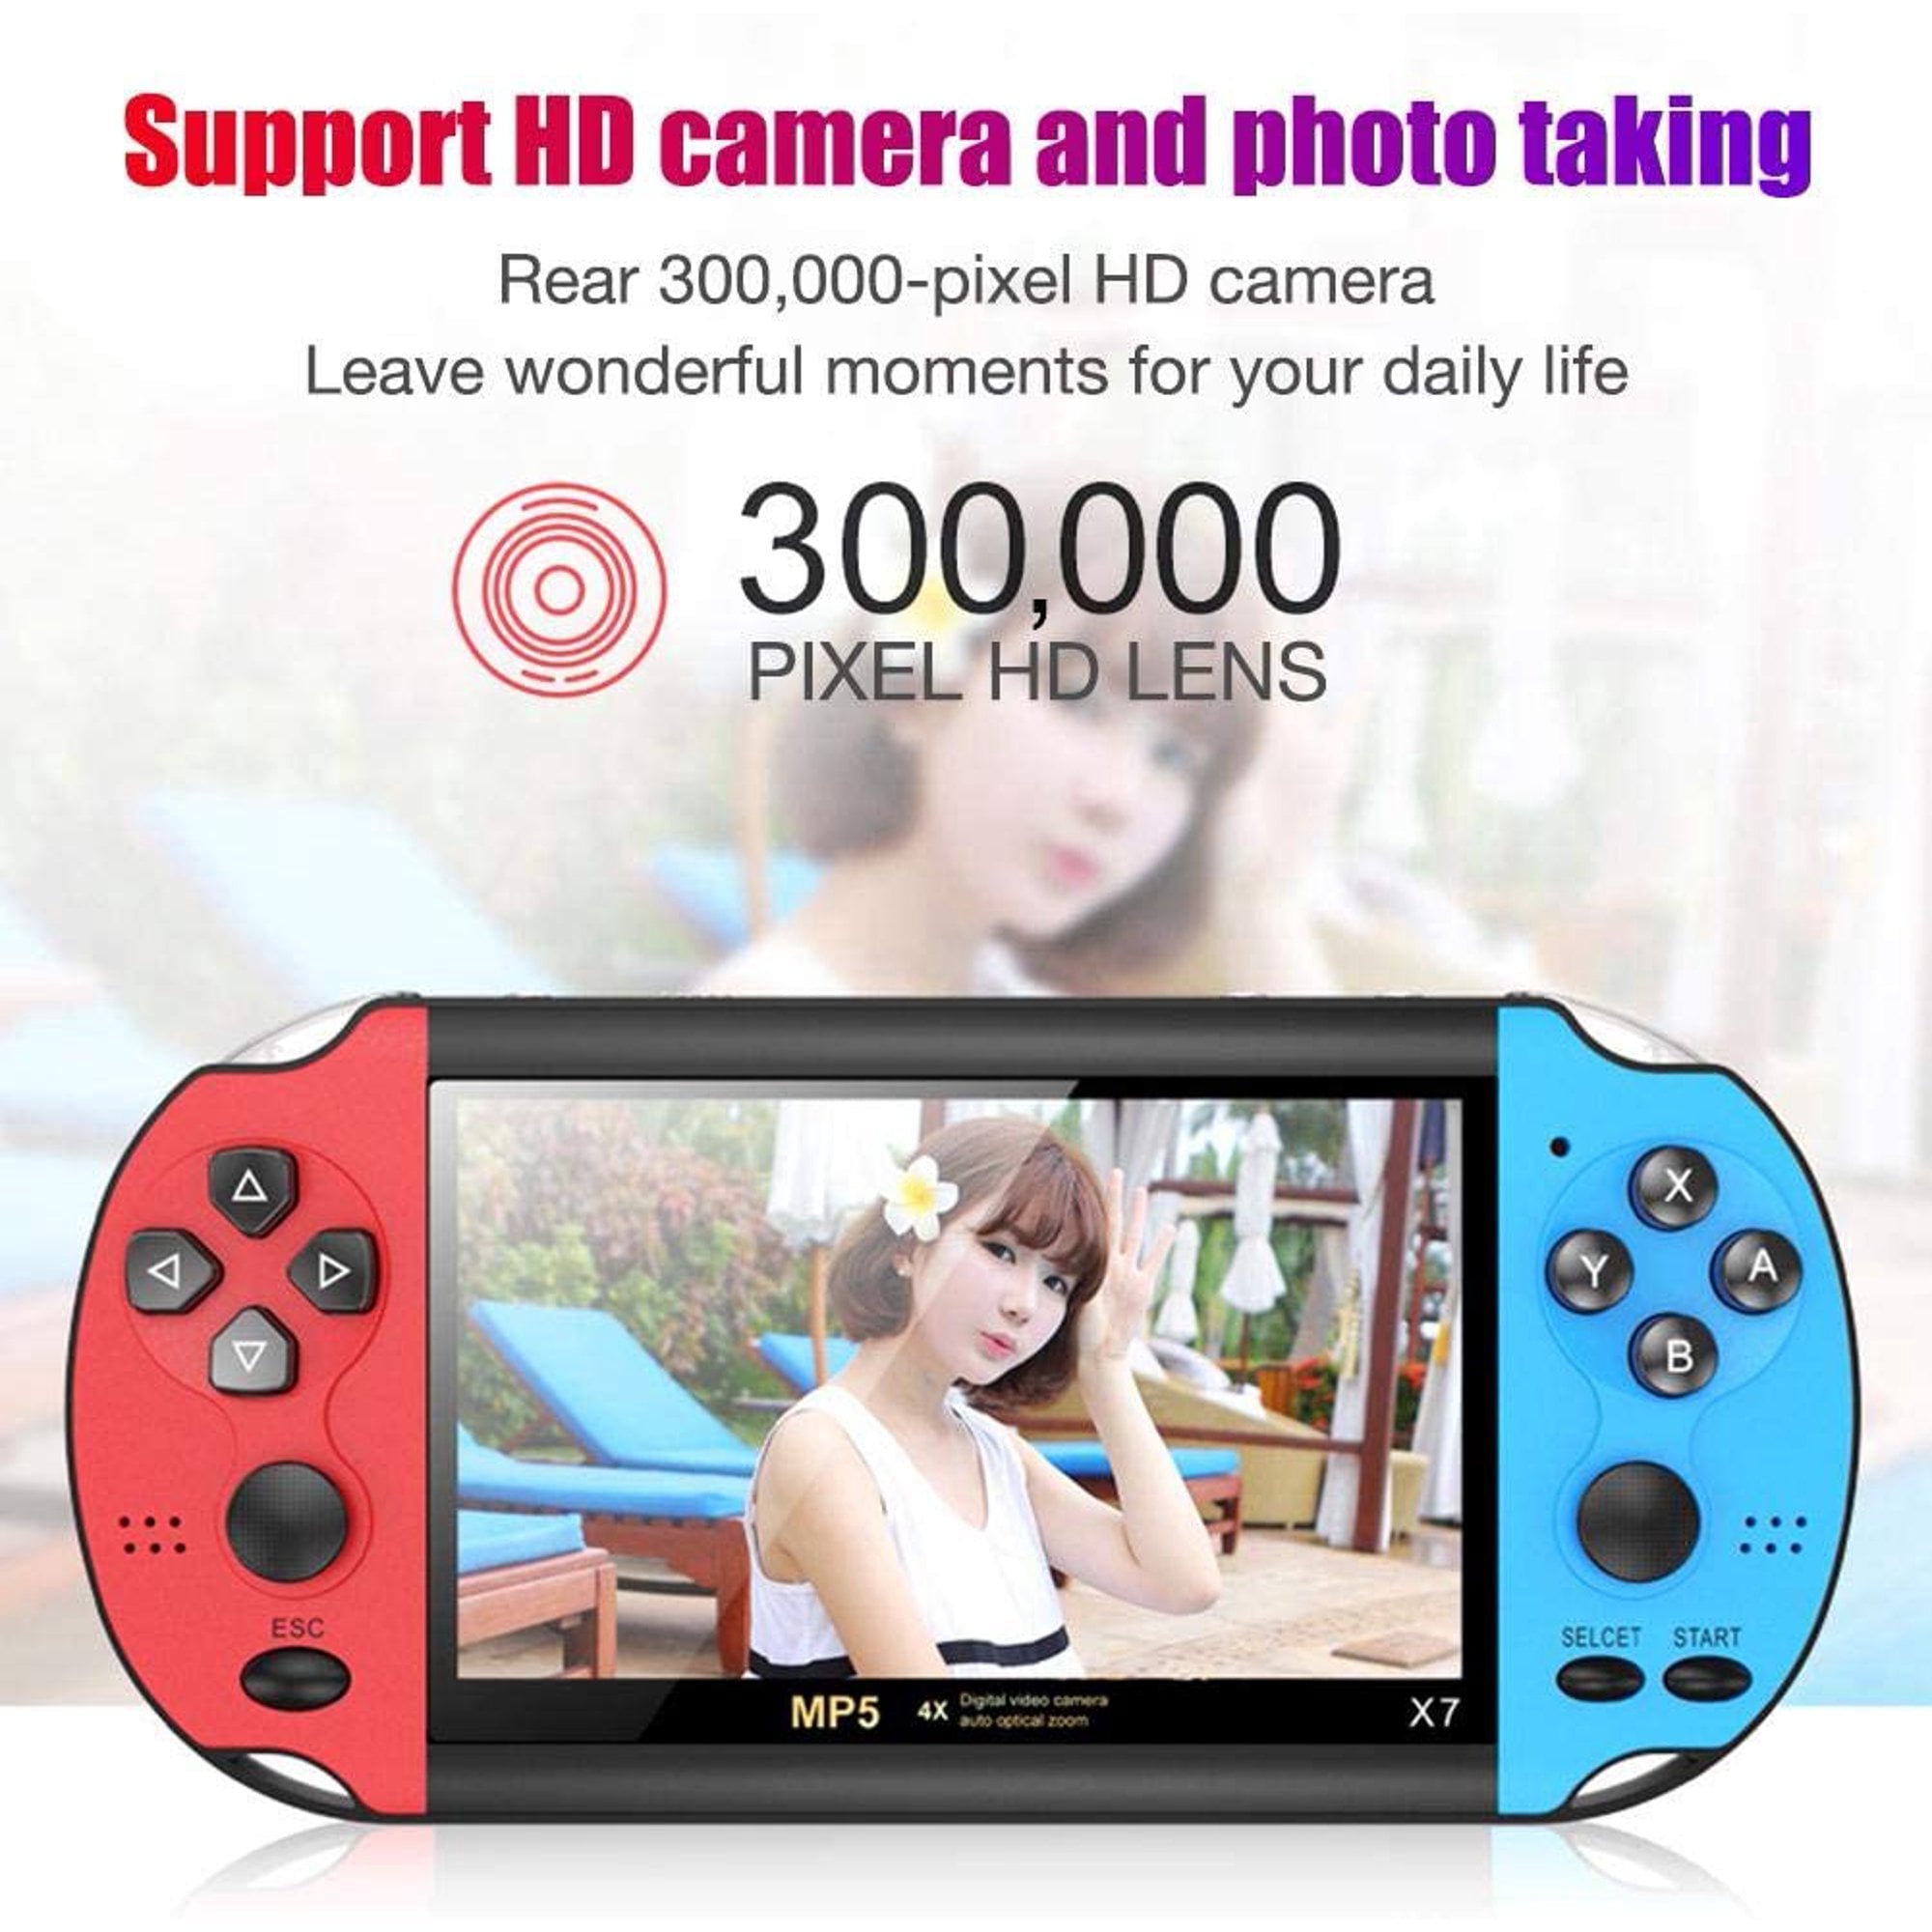 Lotus Portable Handheld Game Console Classic Retro Video Game Built-in 1500mah Battery Support TF Card Capacity 1GB-64GB Red and Blue